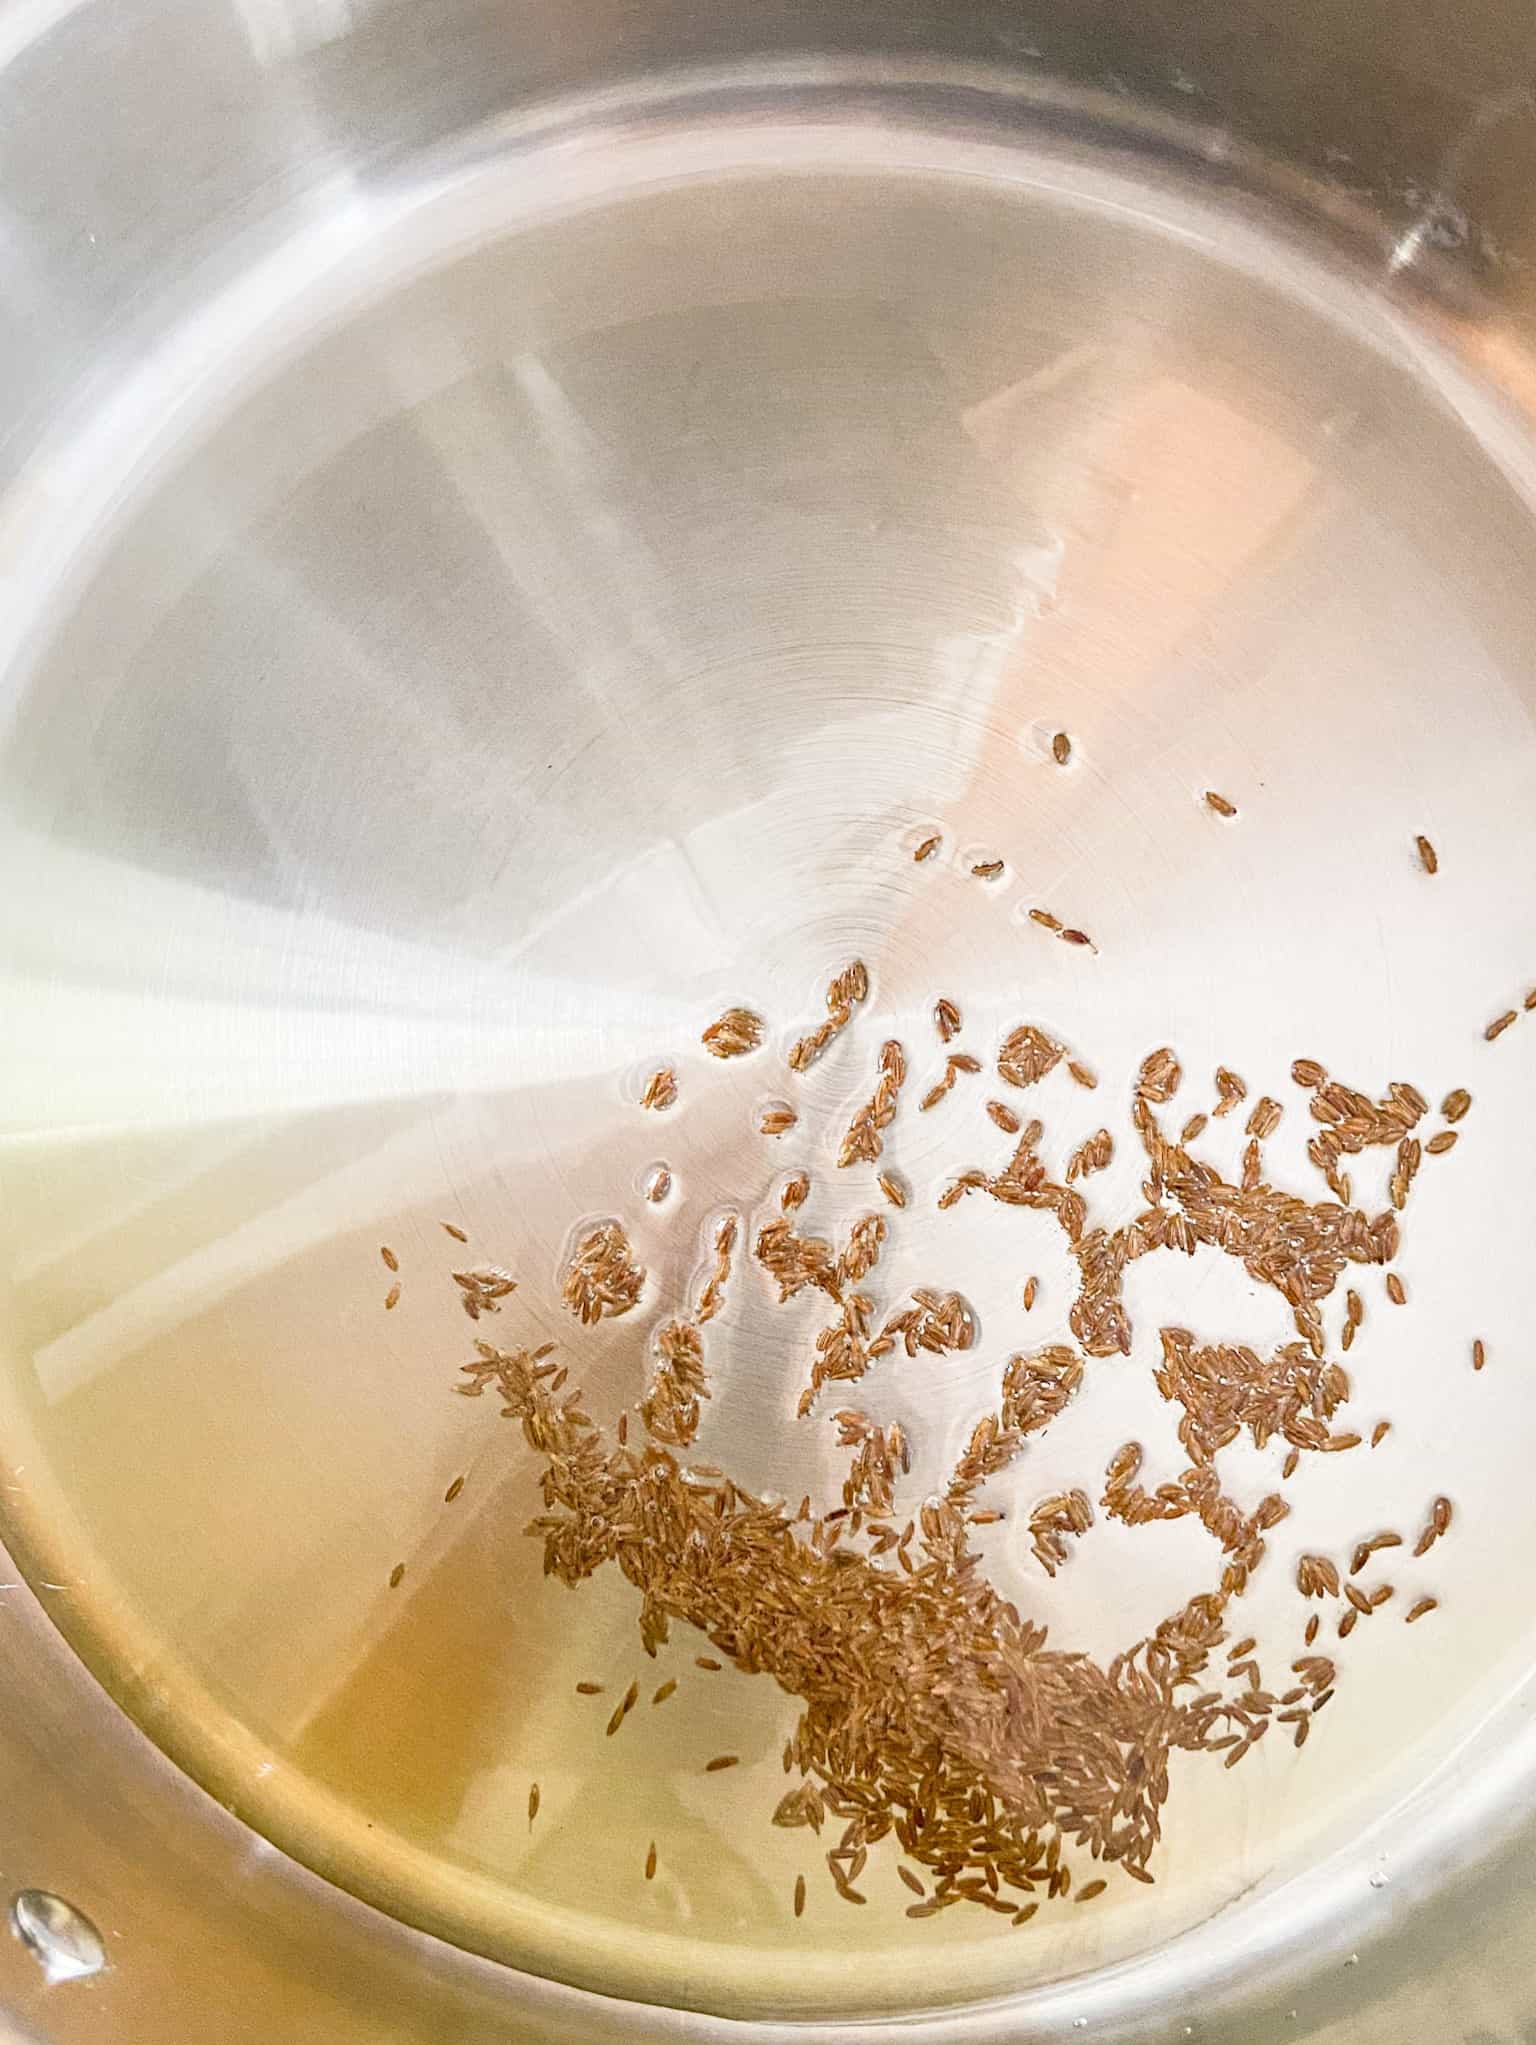 temper cumin seeds in hot oil until it changes color.